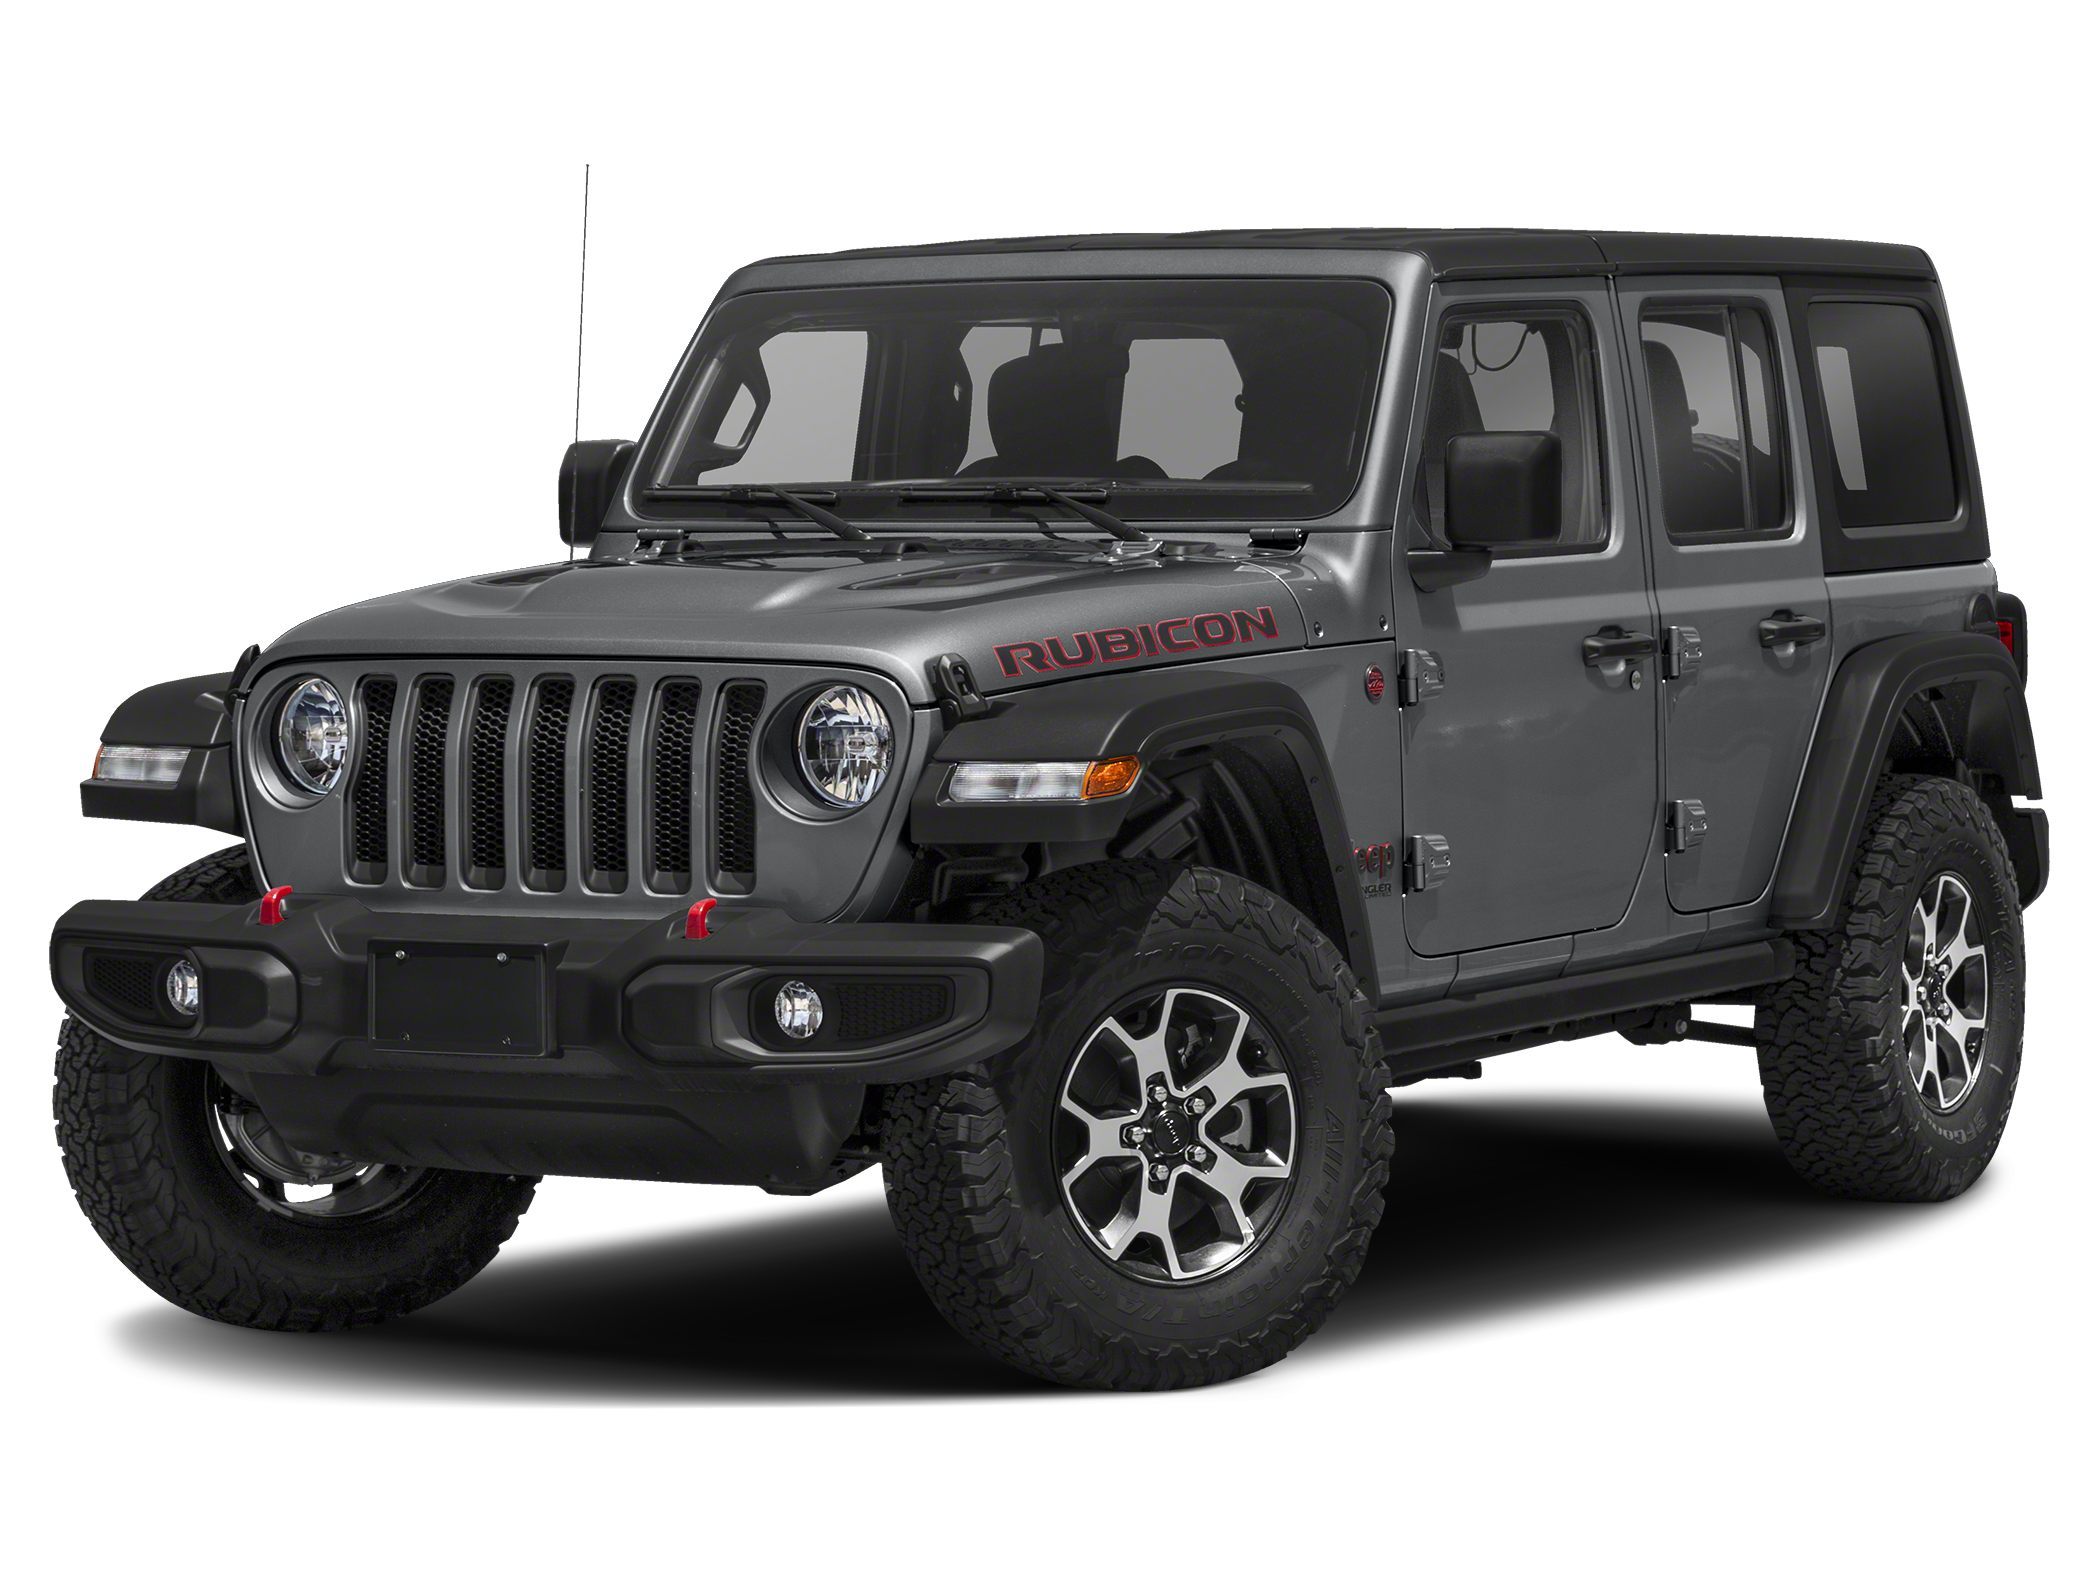 Used 2020 Jeep Wrangler Unlimited Rubicon For Sale | Annapolis, MD | VIN#  1C4HJXFG4LW142379